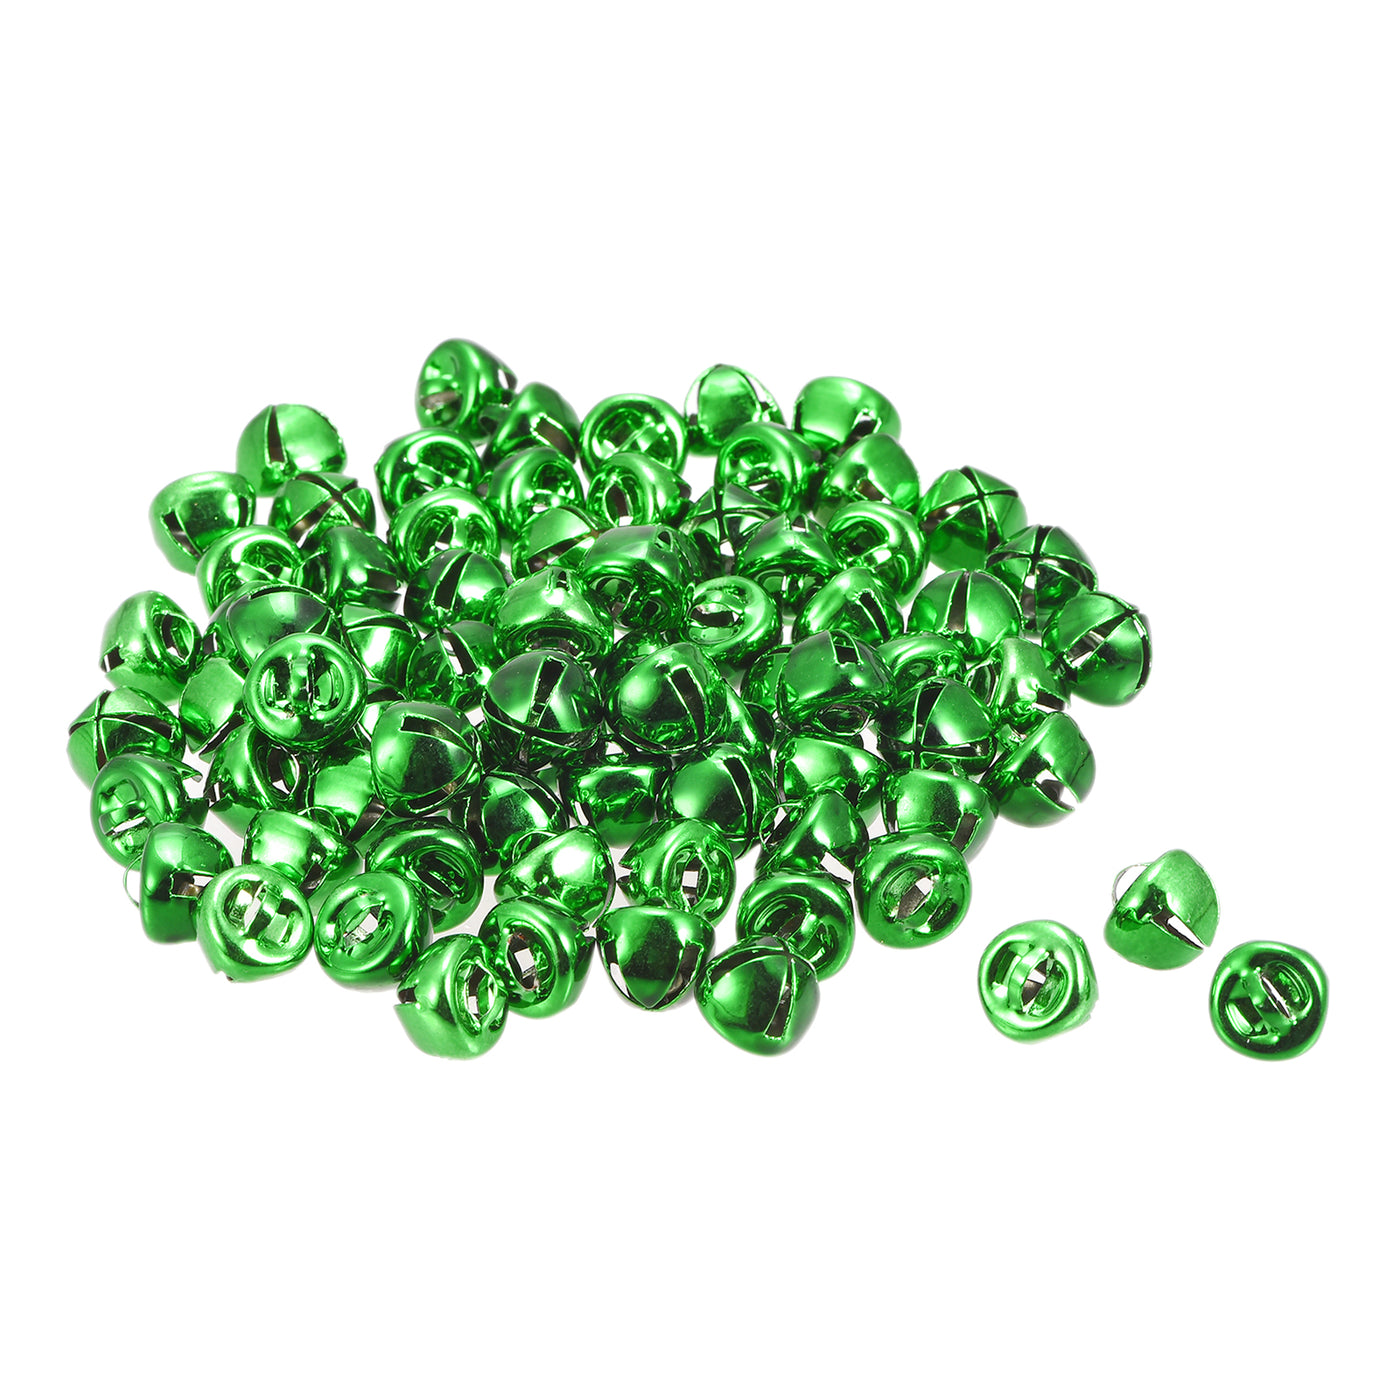 uxcell Uxcell Jingle Bells, 10mm 24pcs Small Bells for Crafts DIY Christmas, Green